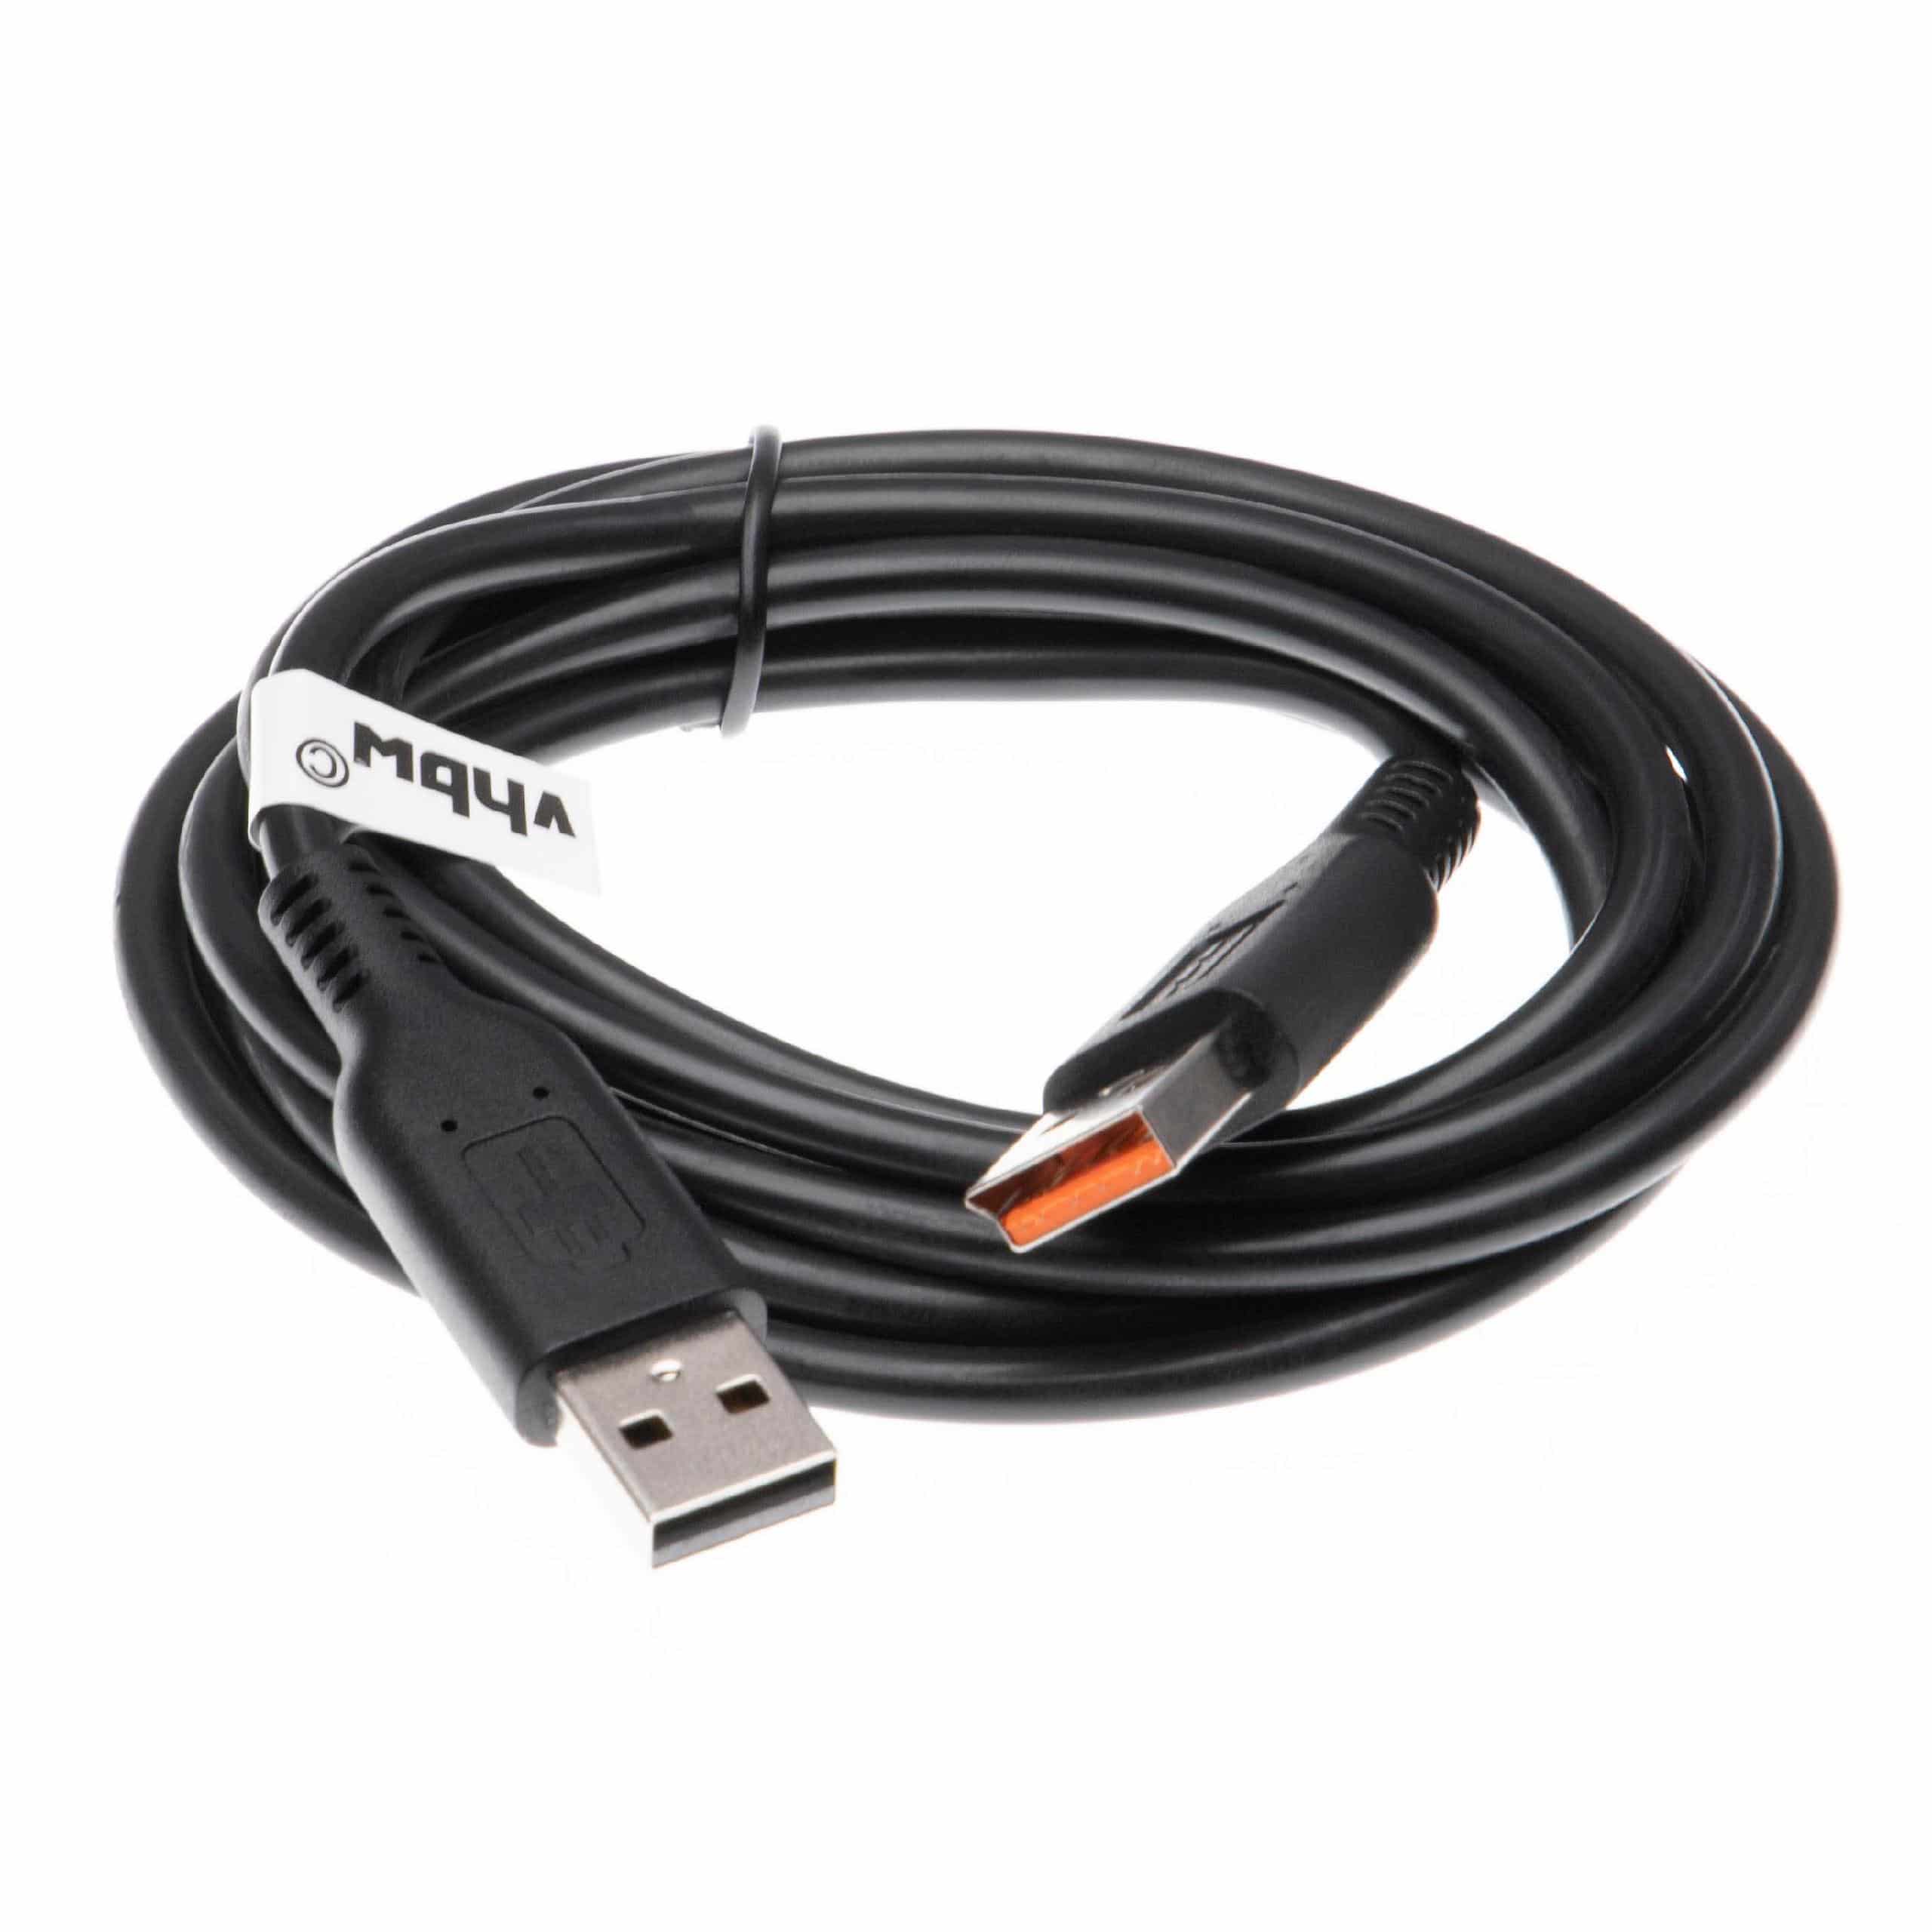 vhbw USB Data Cable Tablet - 2in1 Charging Cable (Standard-USB Type A to Tablet) 200cm Black 